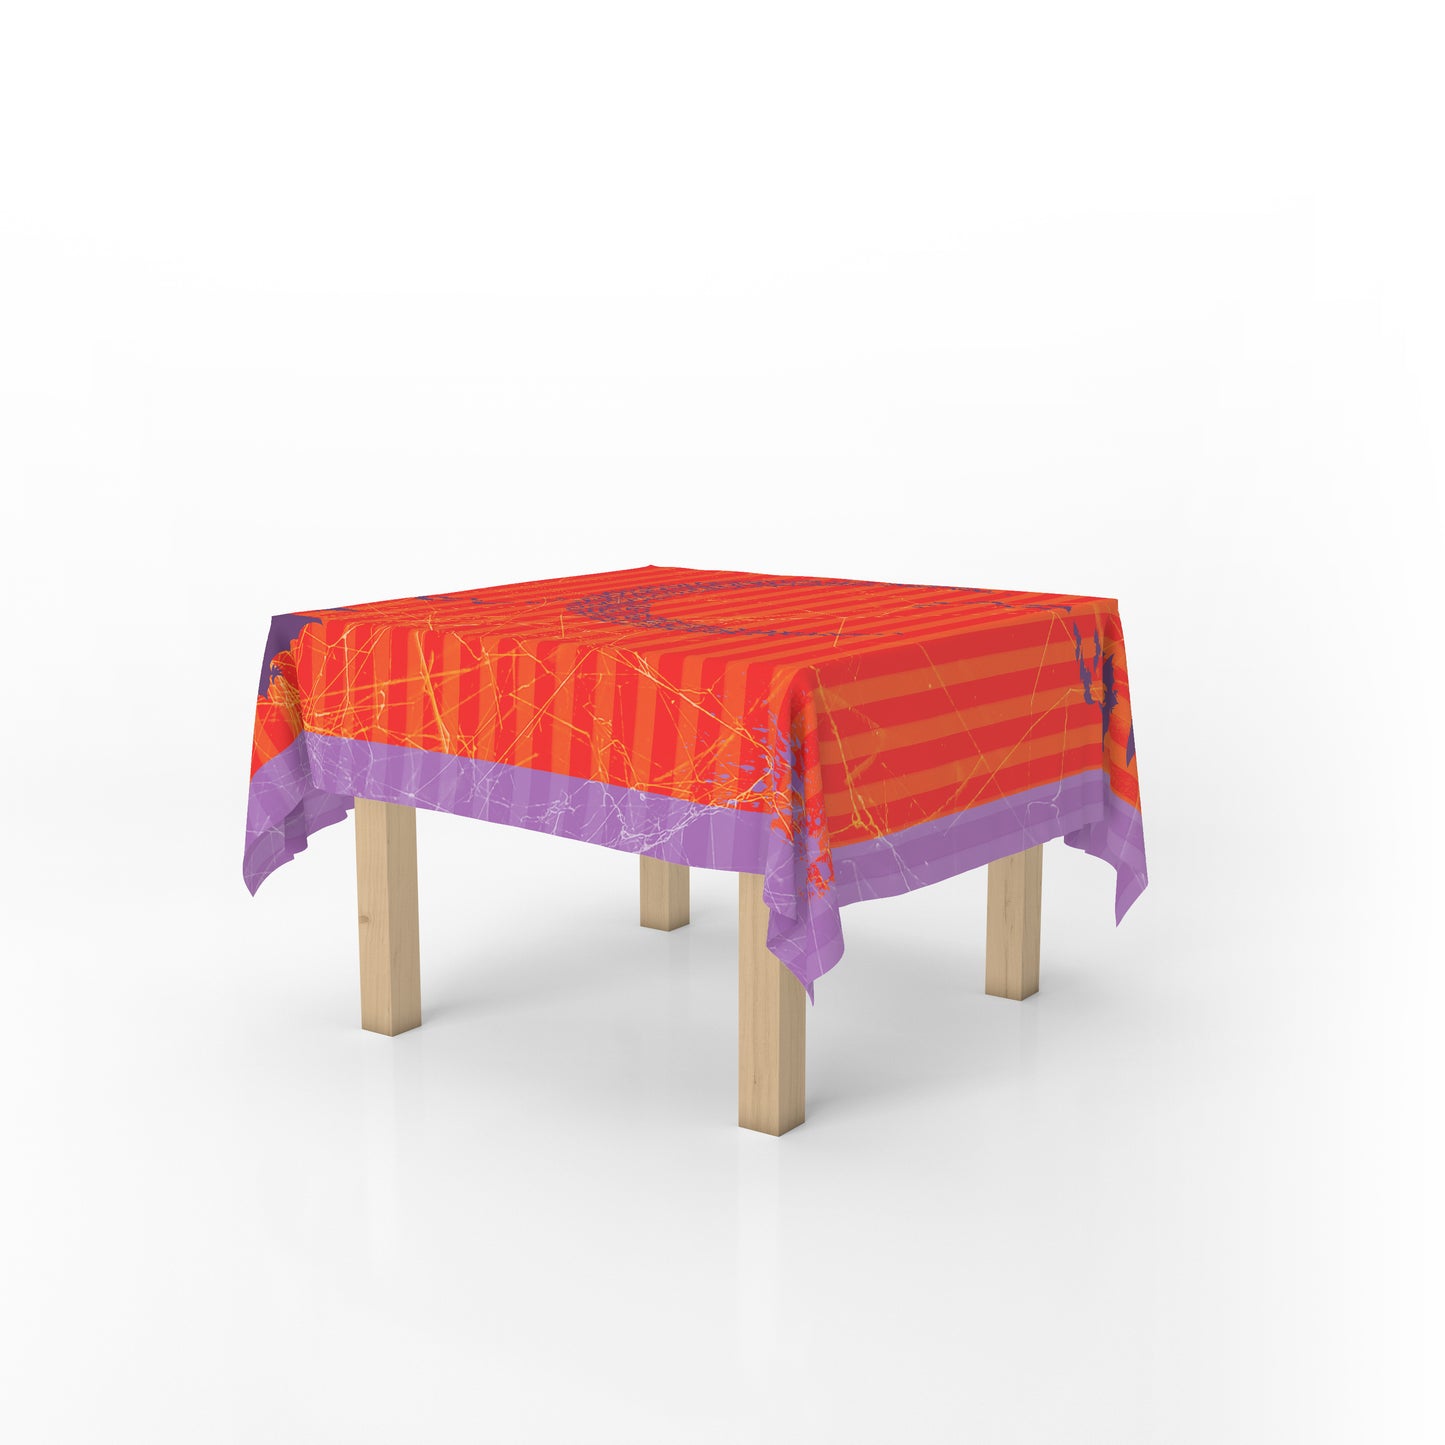 Orange Scary Moon Square Tablecloth